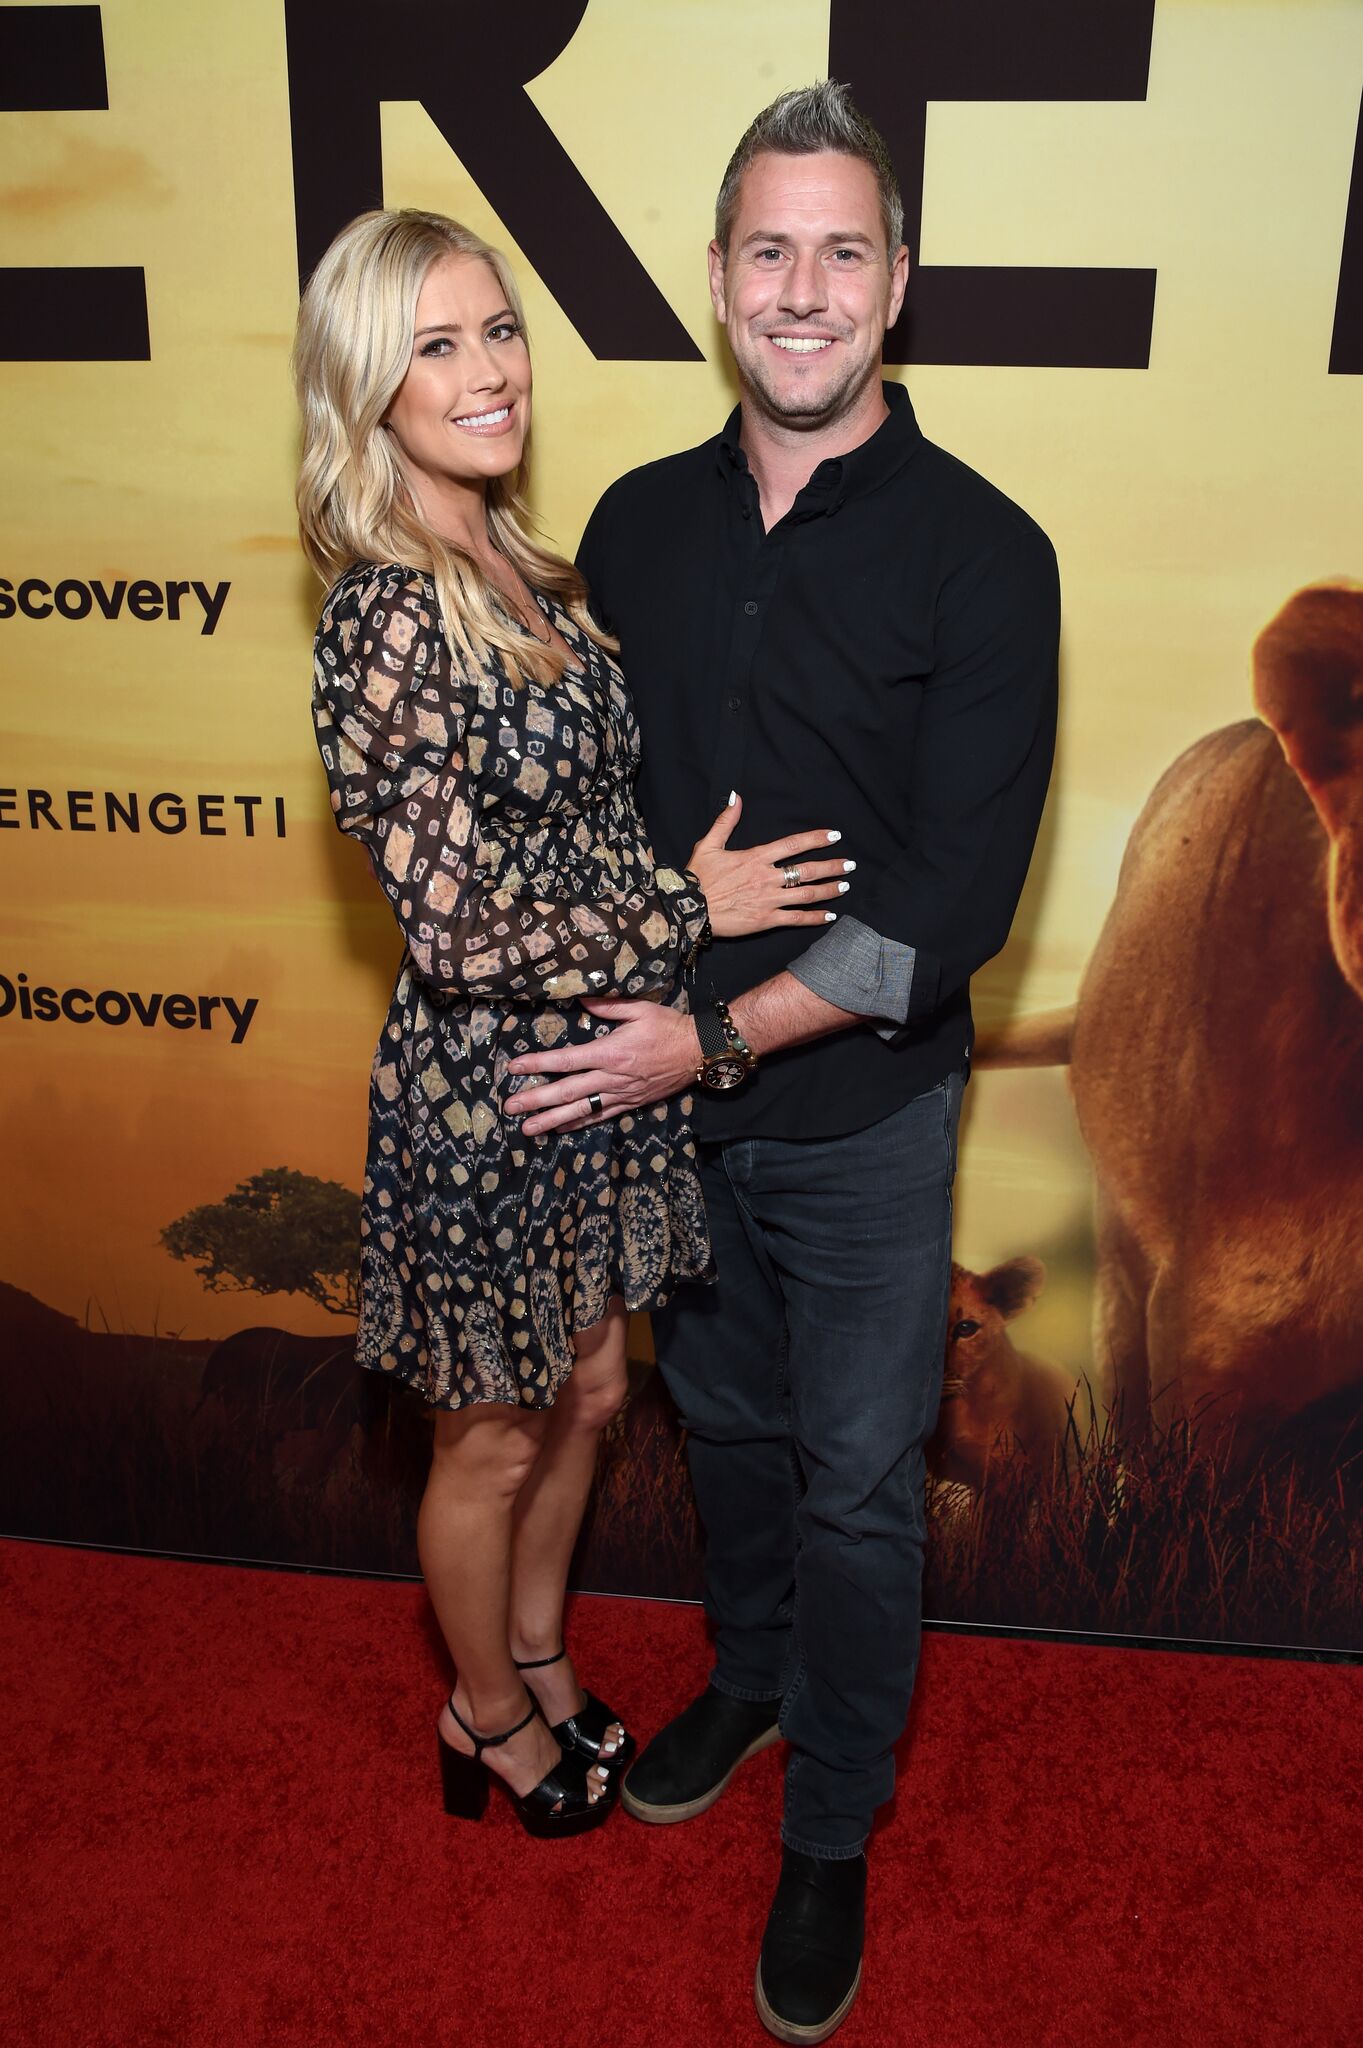 Christina Anstead and Ant Anstead attend Discovery's "Serengeti" premiere | Getty Images